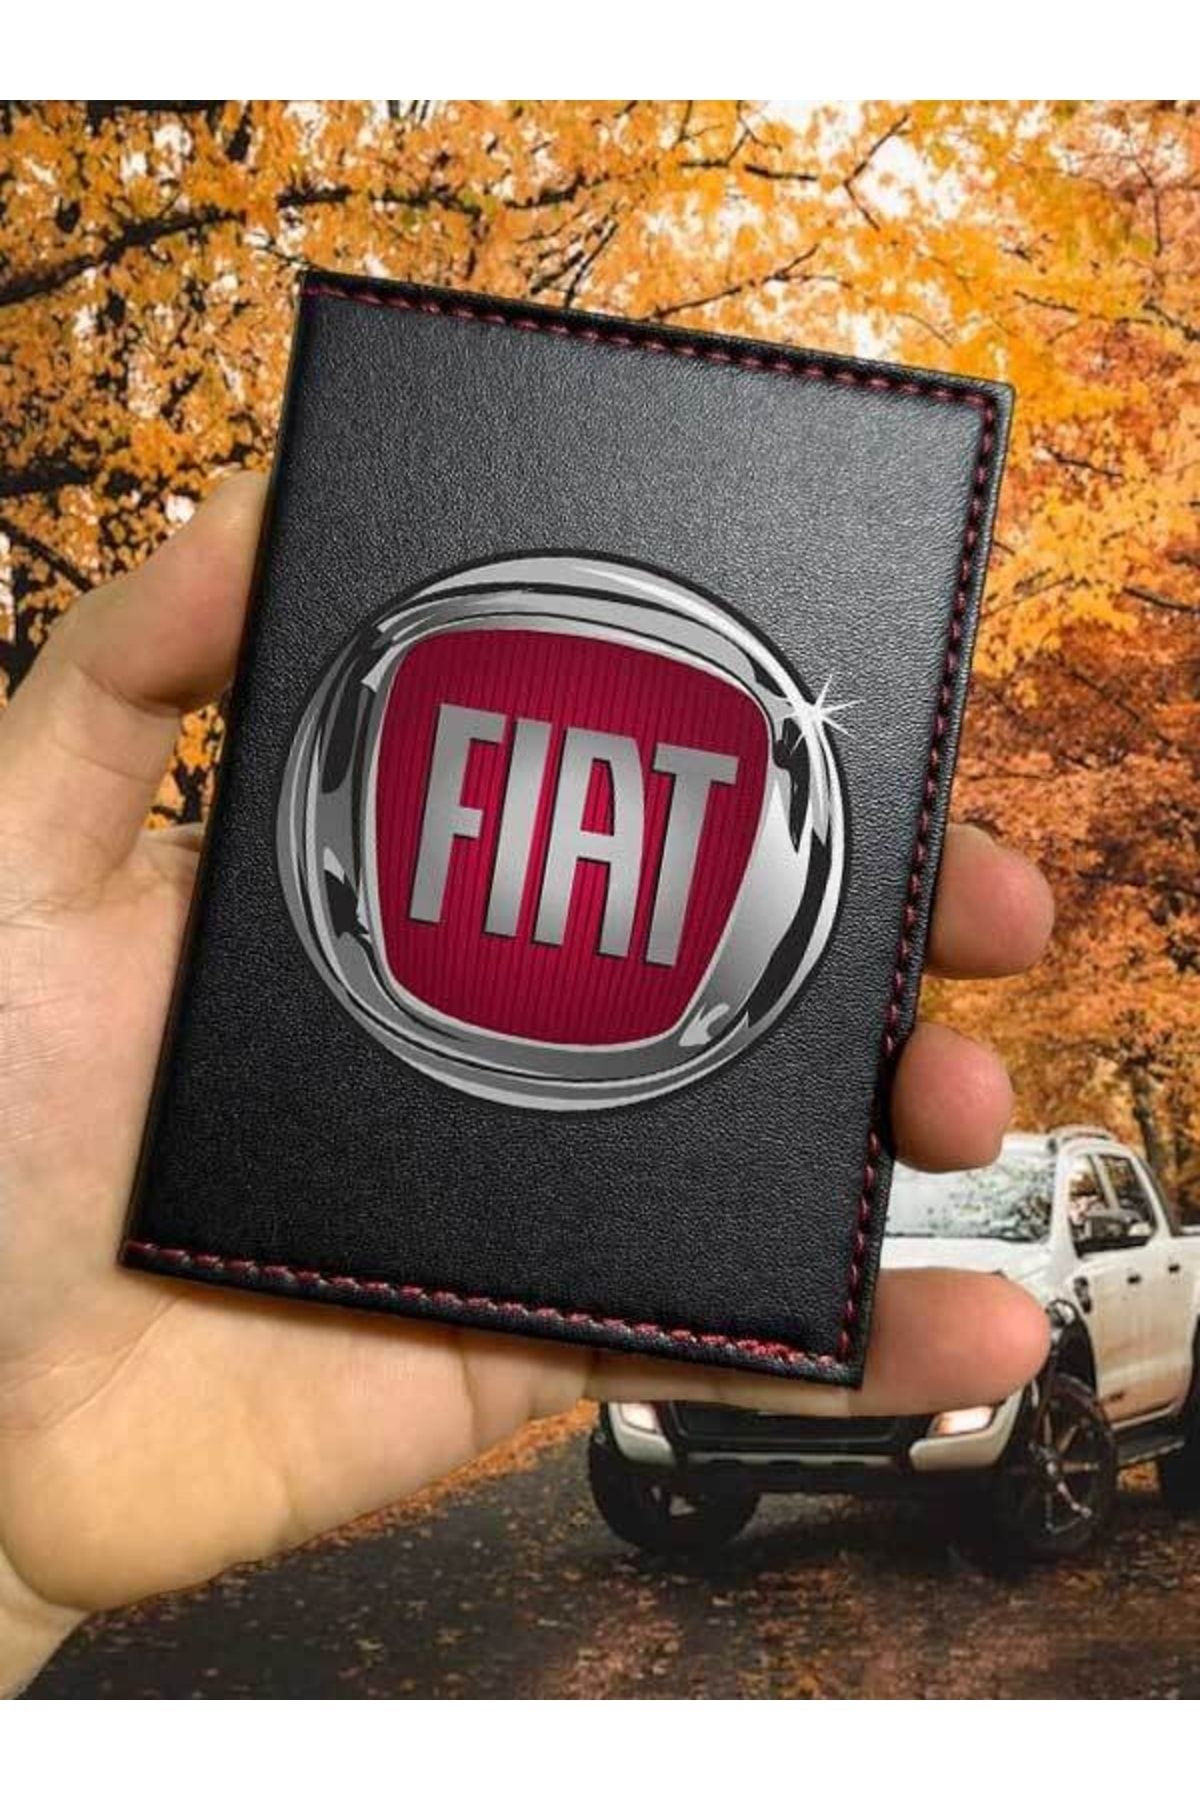 Cekuonline Fiat Patterned License Container Logo Auto License Cover Vinlex  Leather Stitched Vehicle License Protector